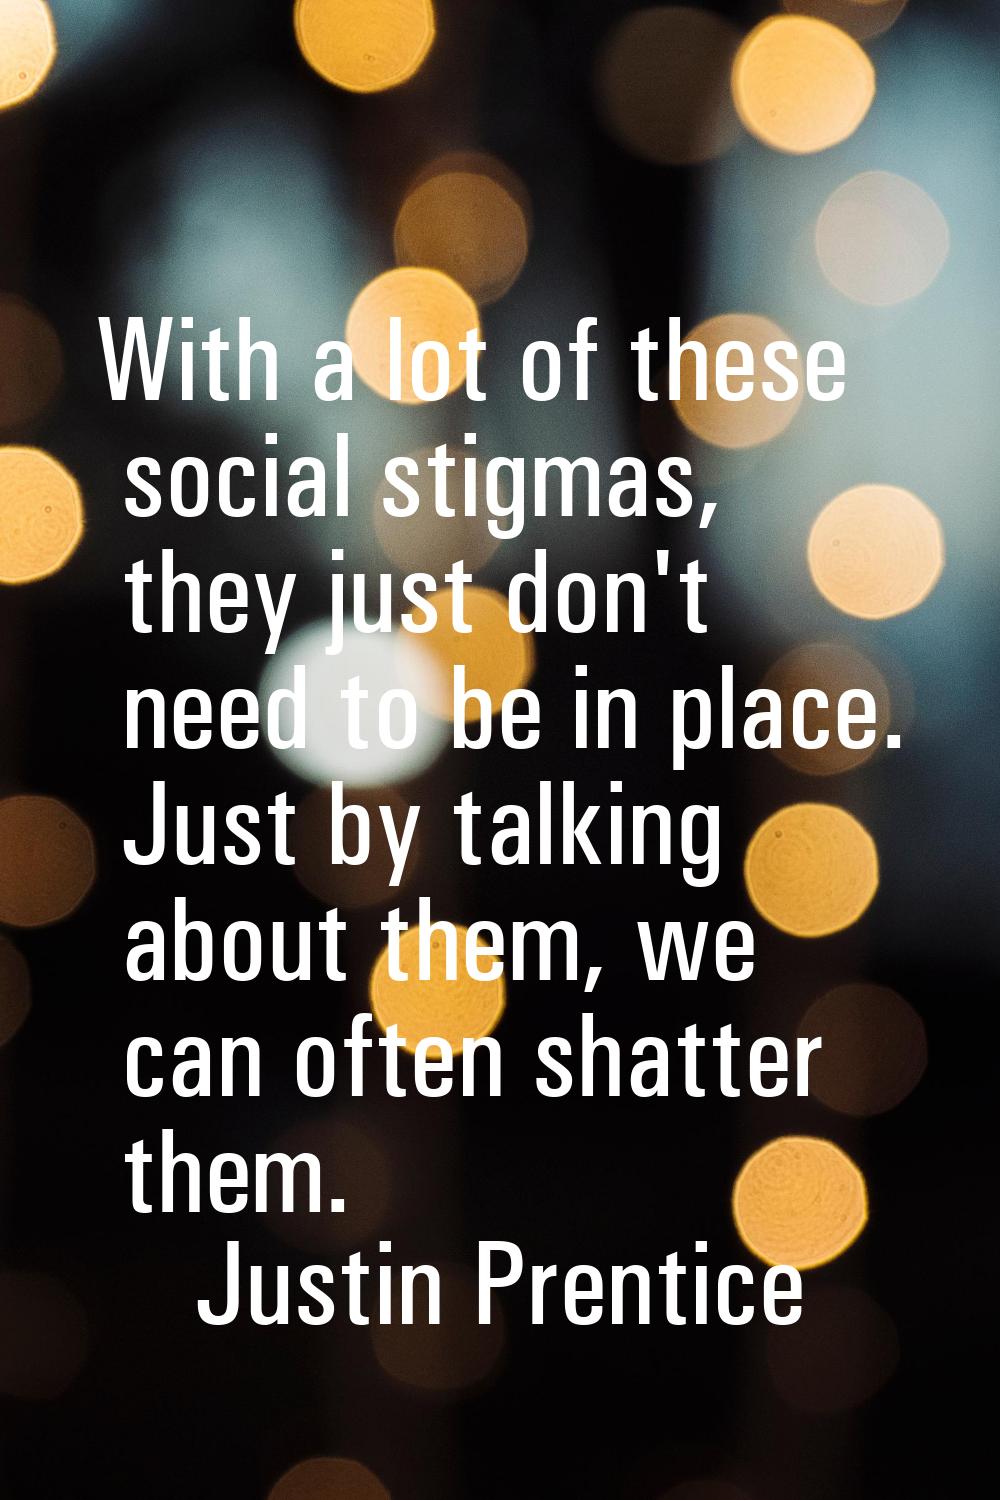 With a lot of these social stigmas, they just don't need to be in place. Just by talking about them